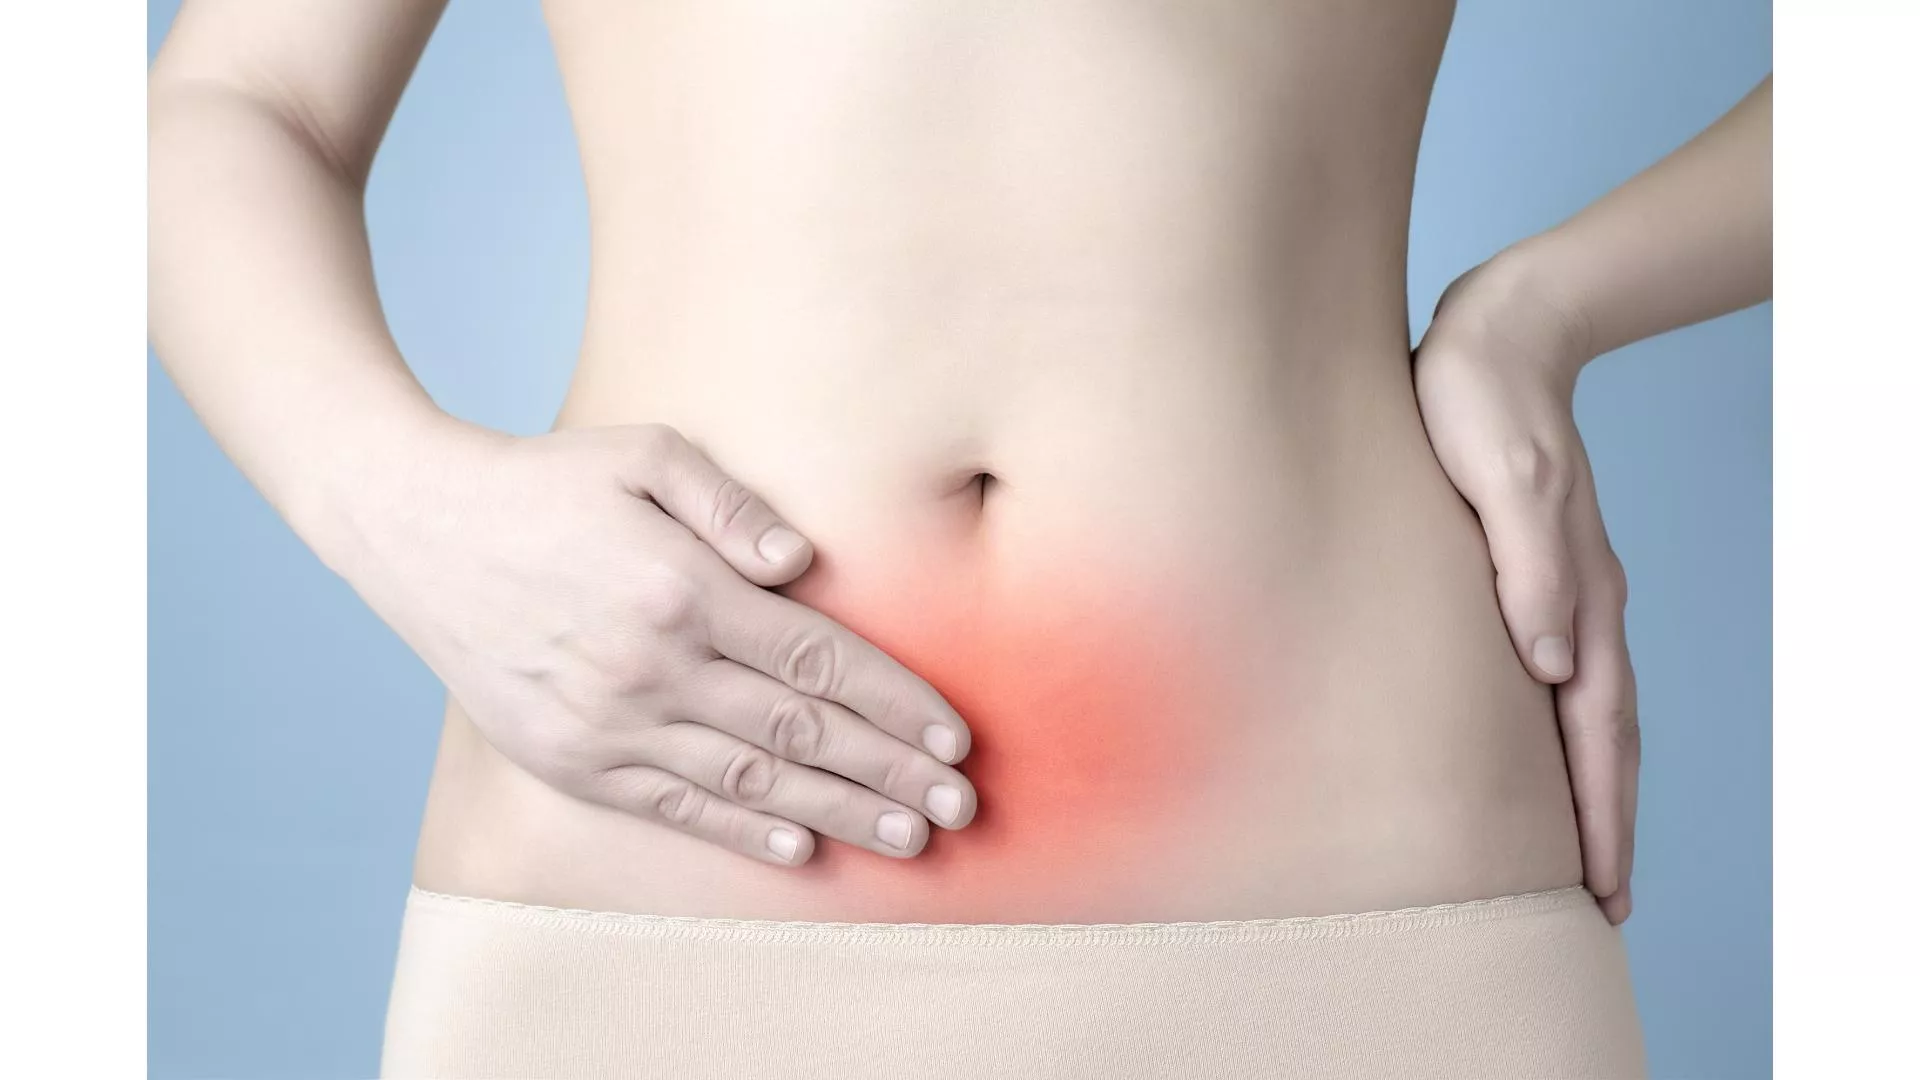 What are the Causes of Abdominal Pain? How Does Abdominal Pain Go Away? What Diseases Cause Abdominal Pain?